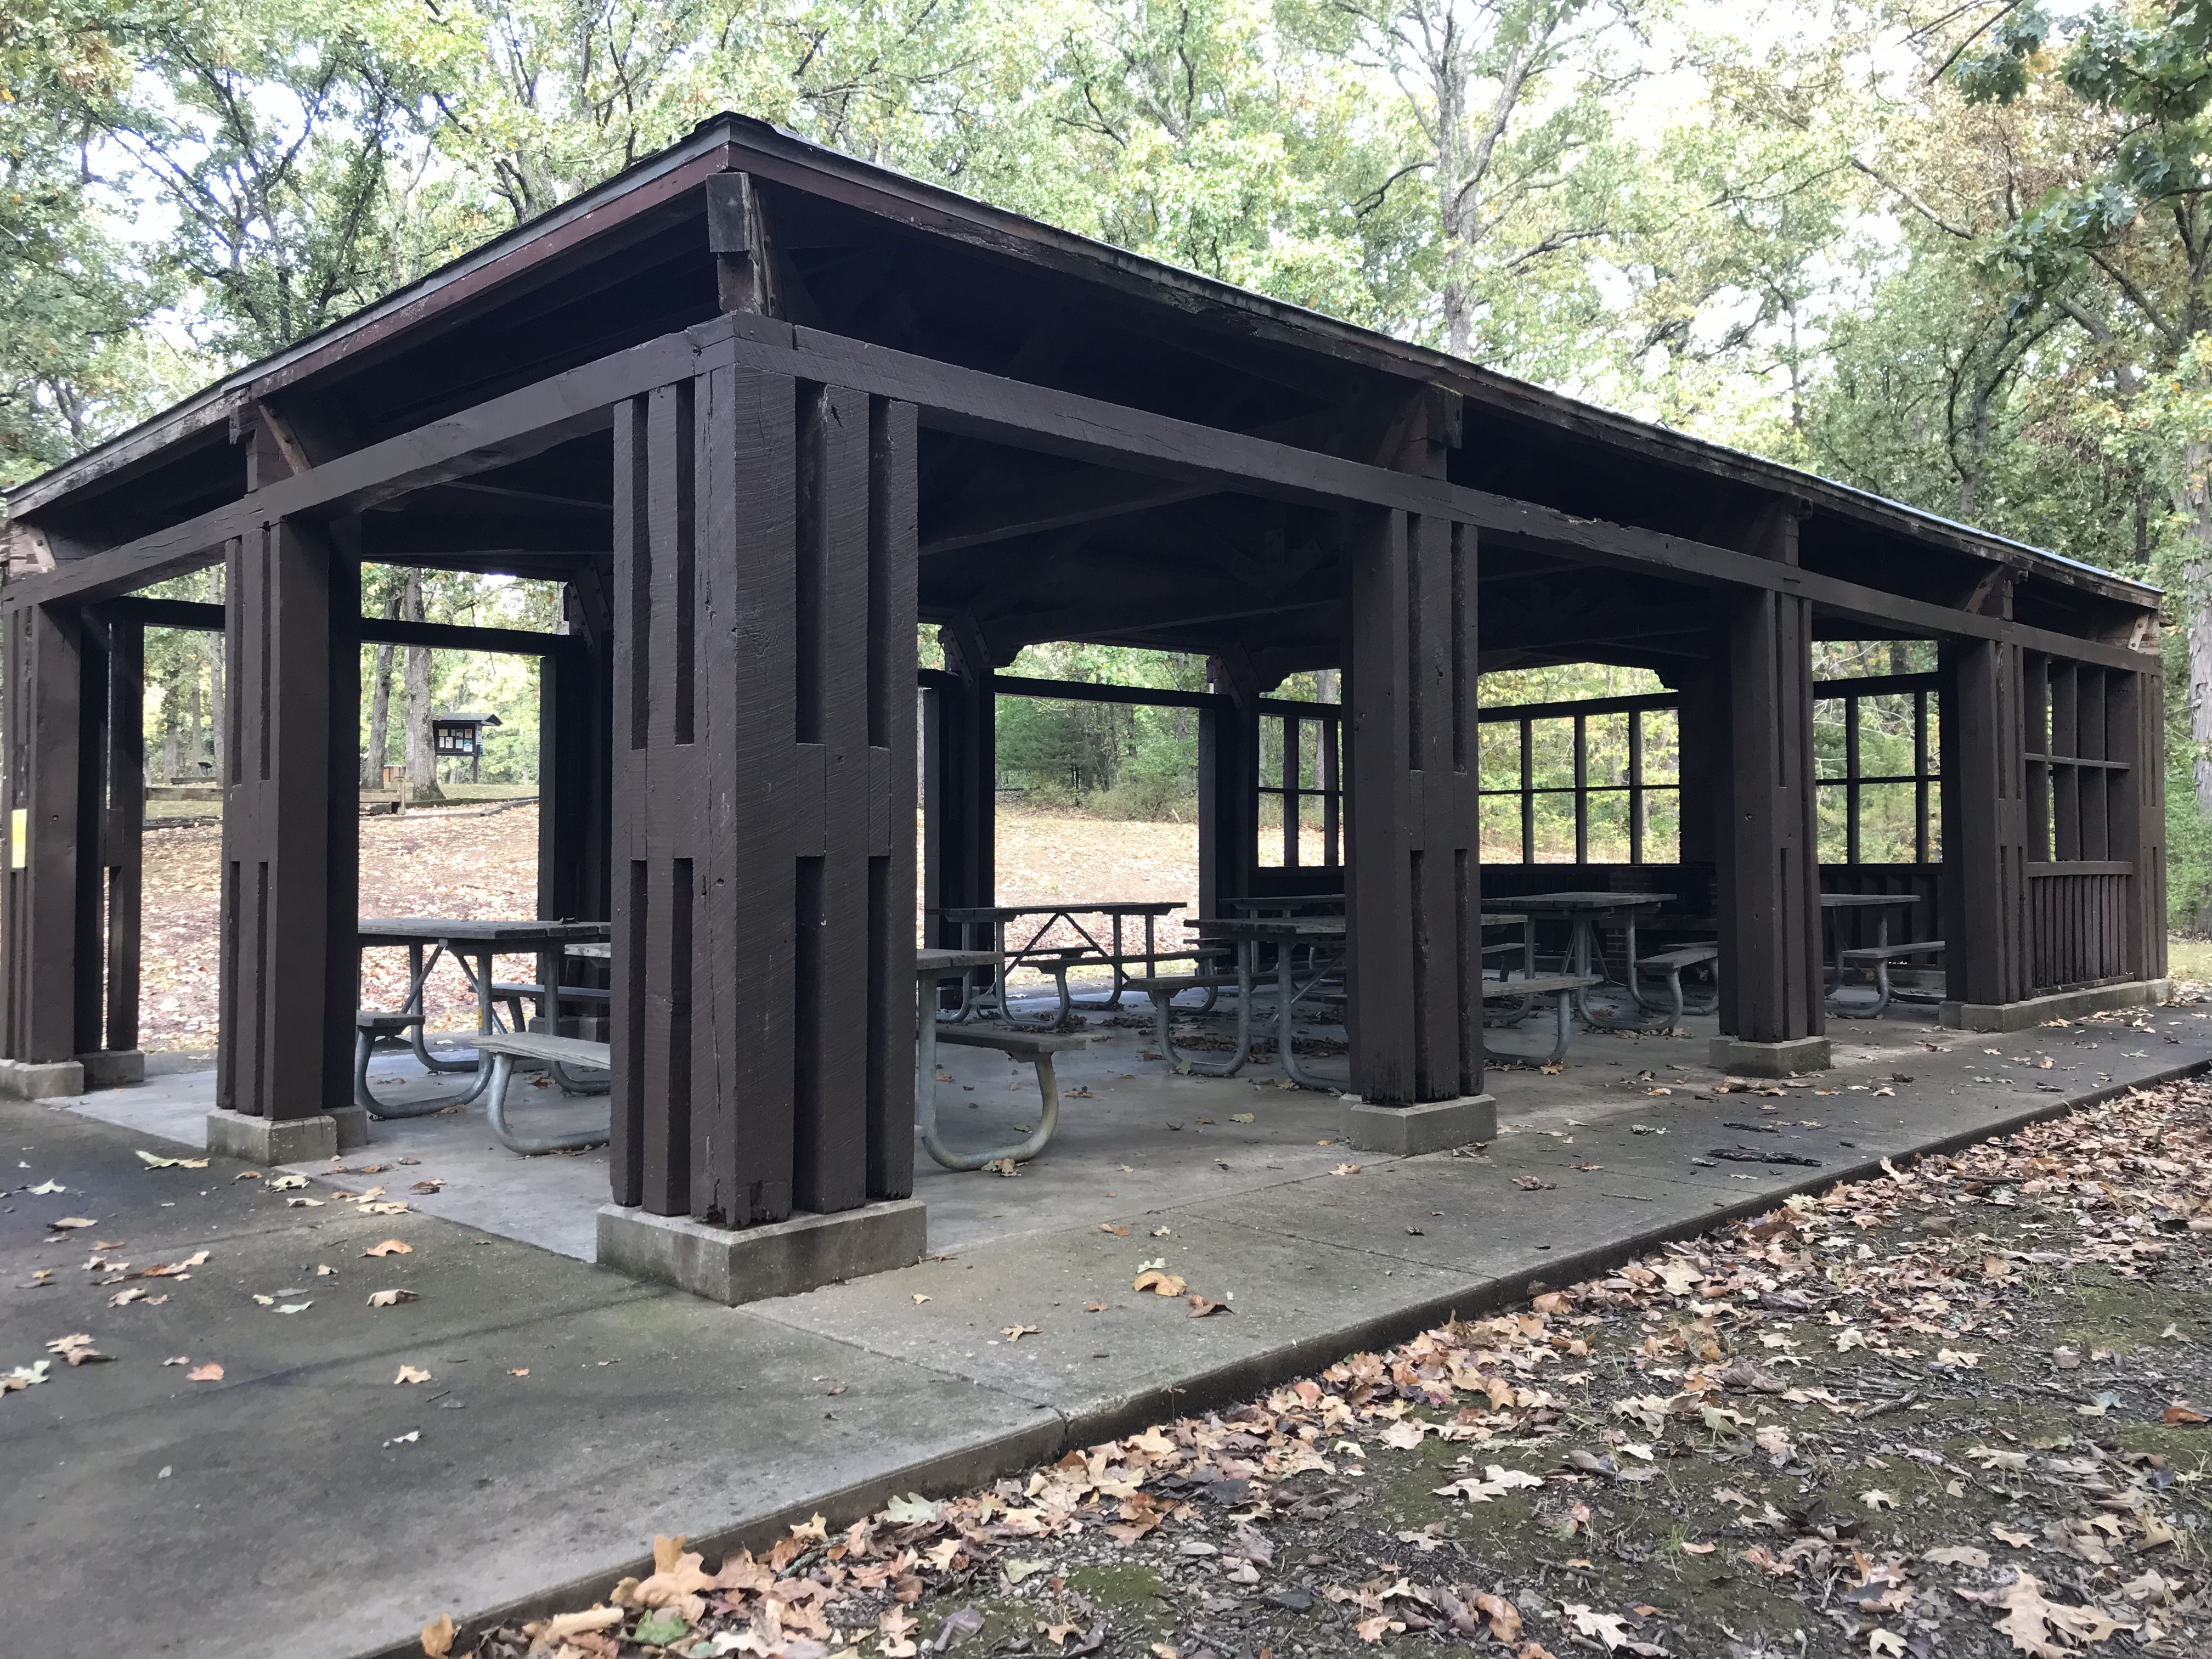 A closeup view of the shelter's wooden pillars and the picnic tables under the roof